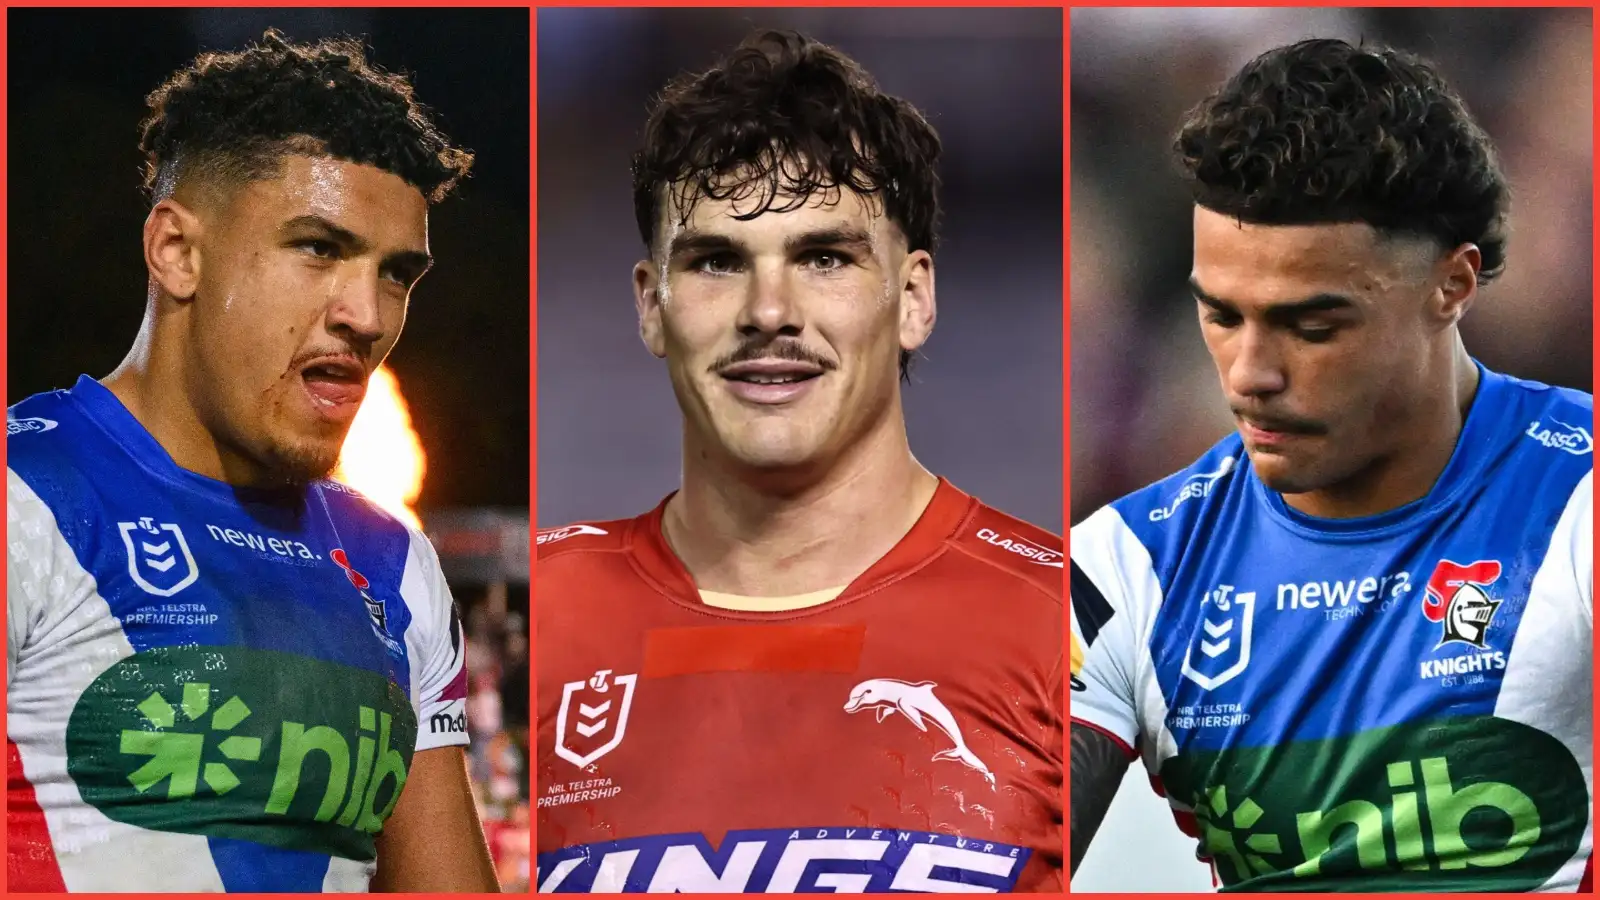 Brits Down Under: Herbie Farnworth scores but tough day for Newcastle Knights trio